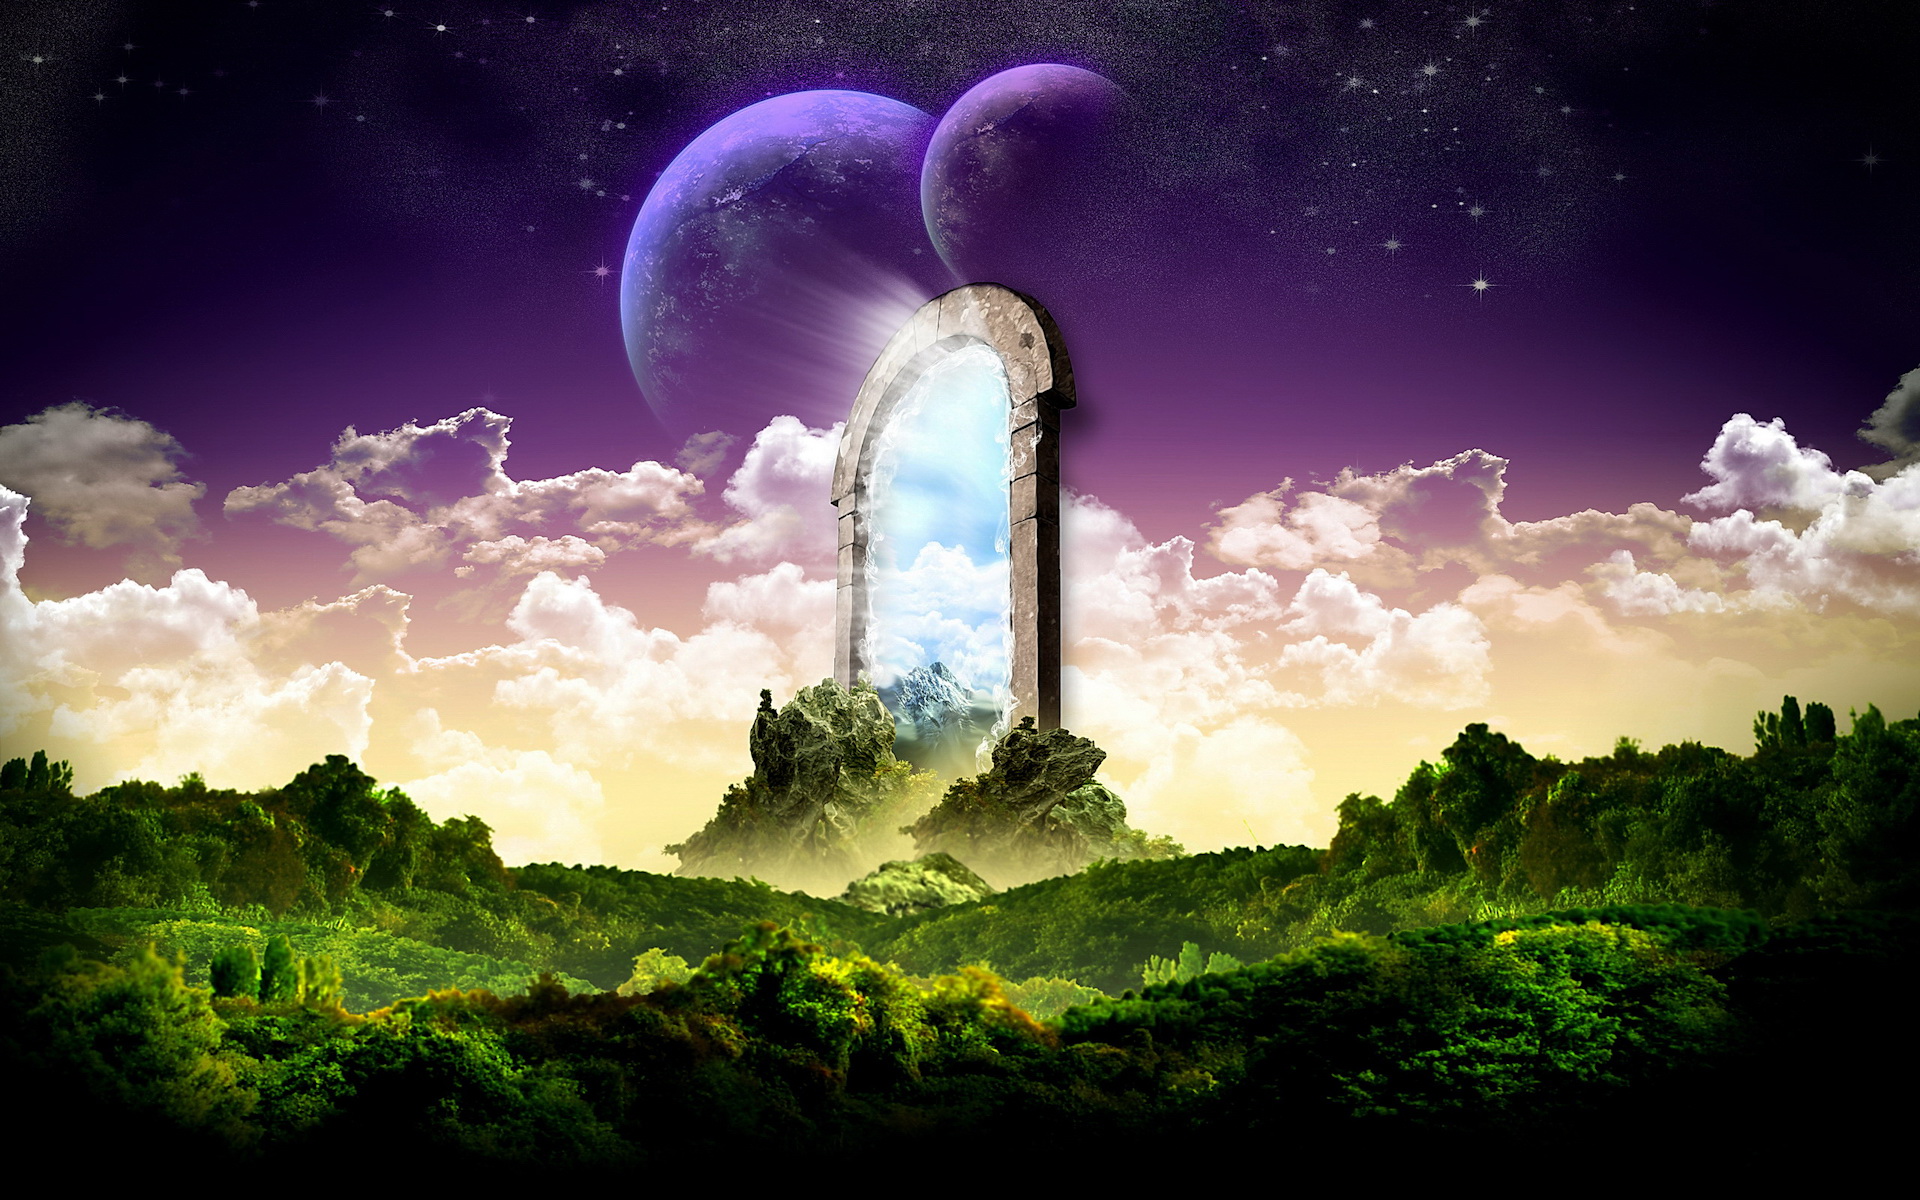 Hd fantasy landscape with magic gate, stars, and clouds.